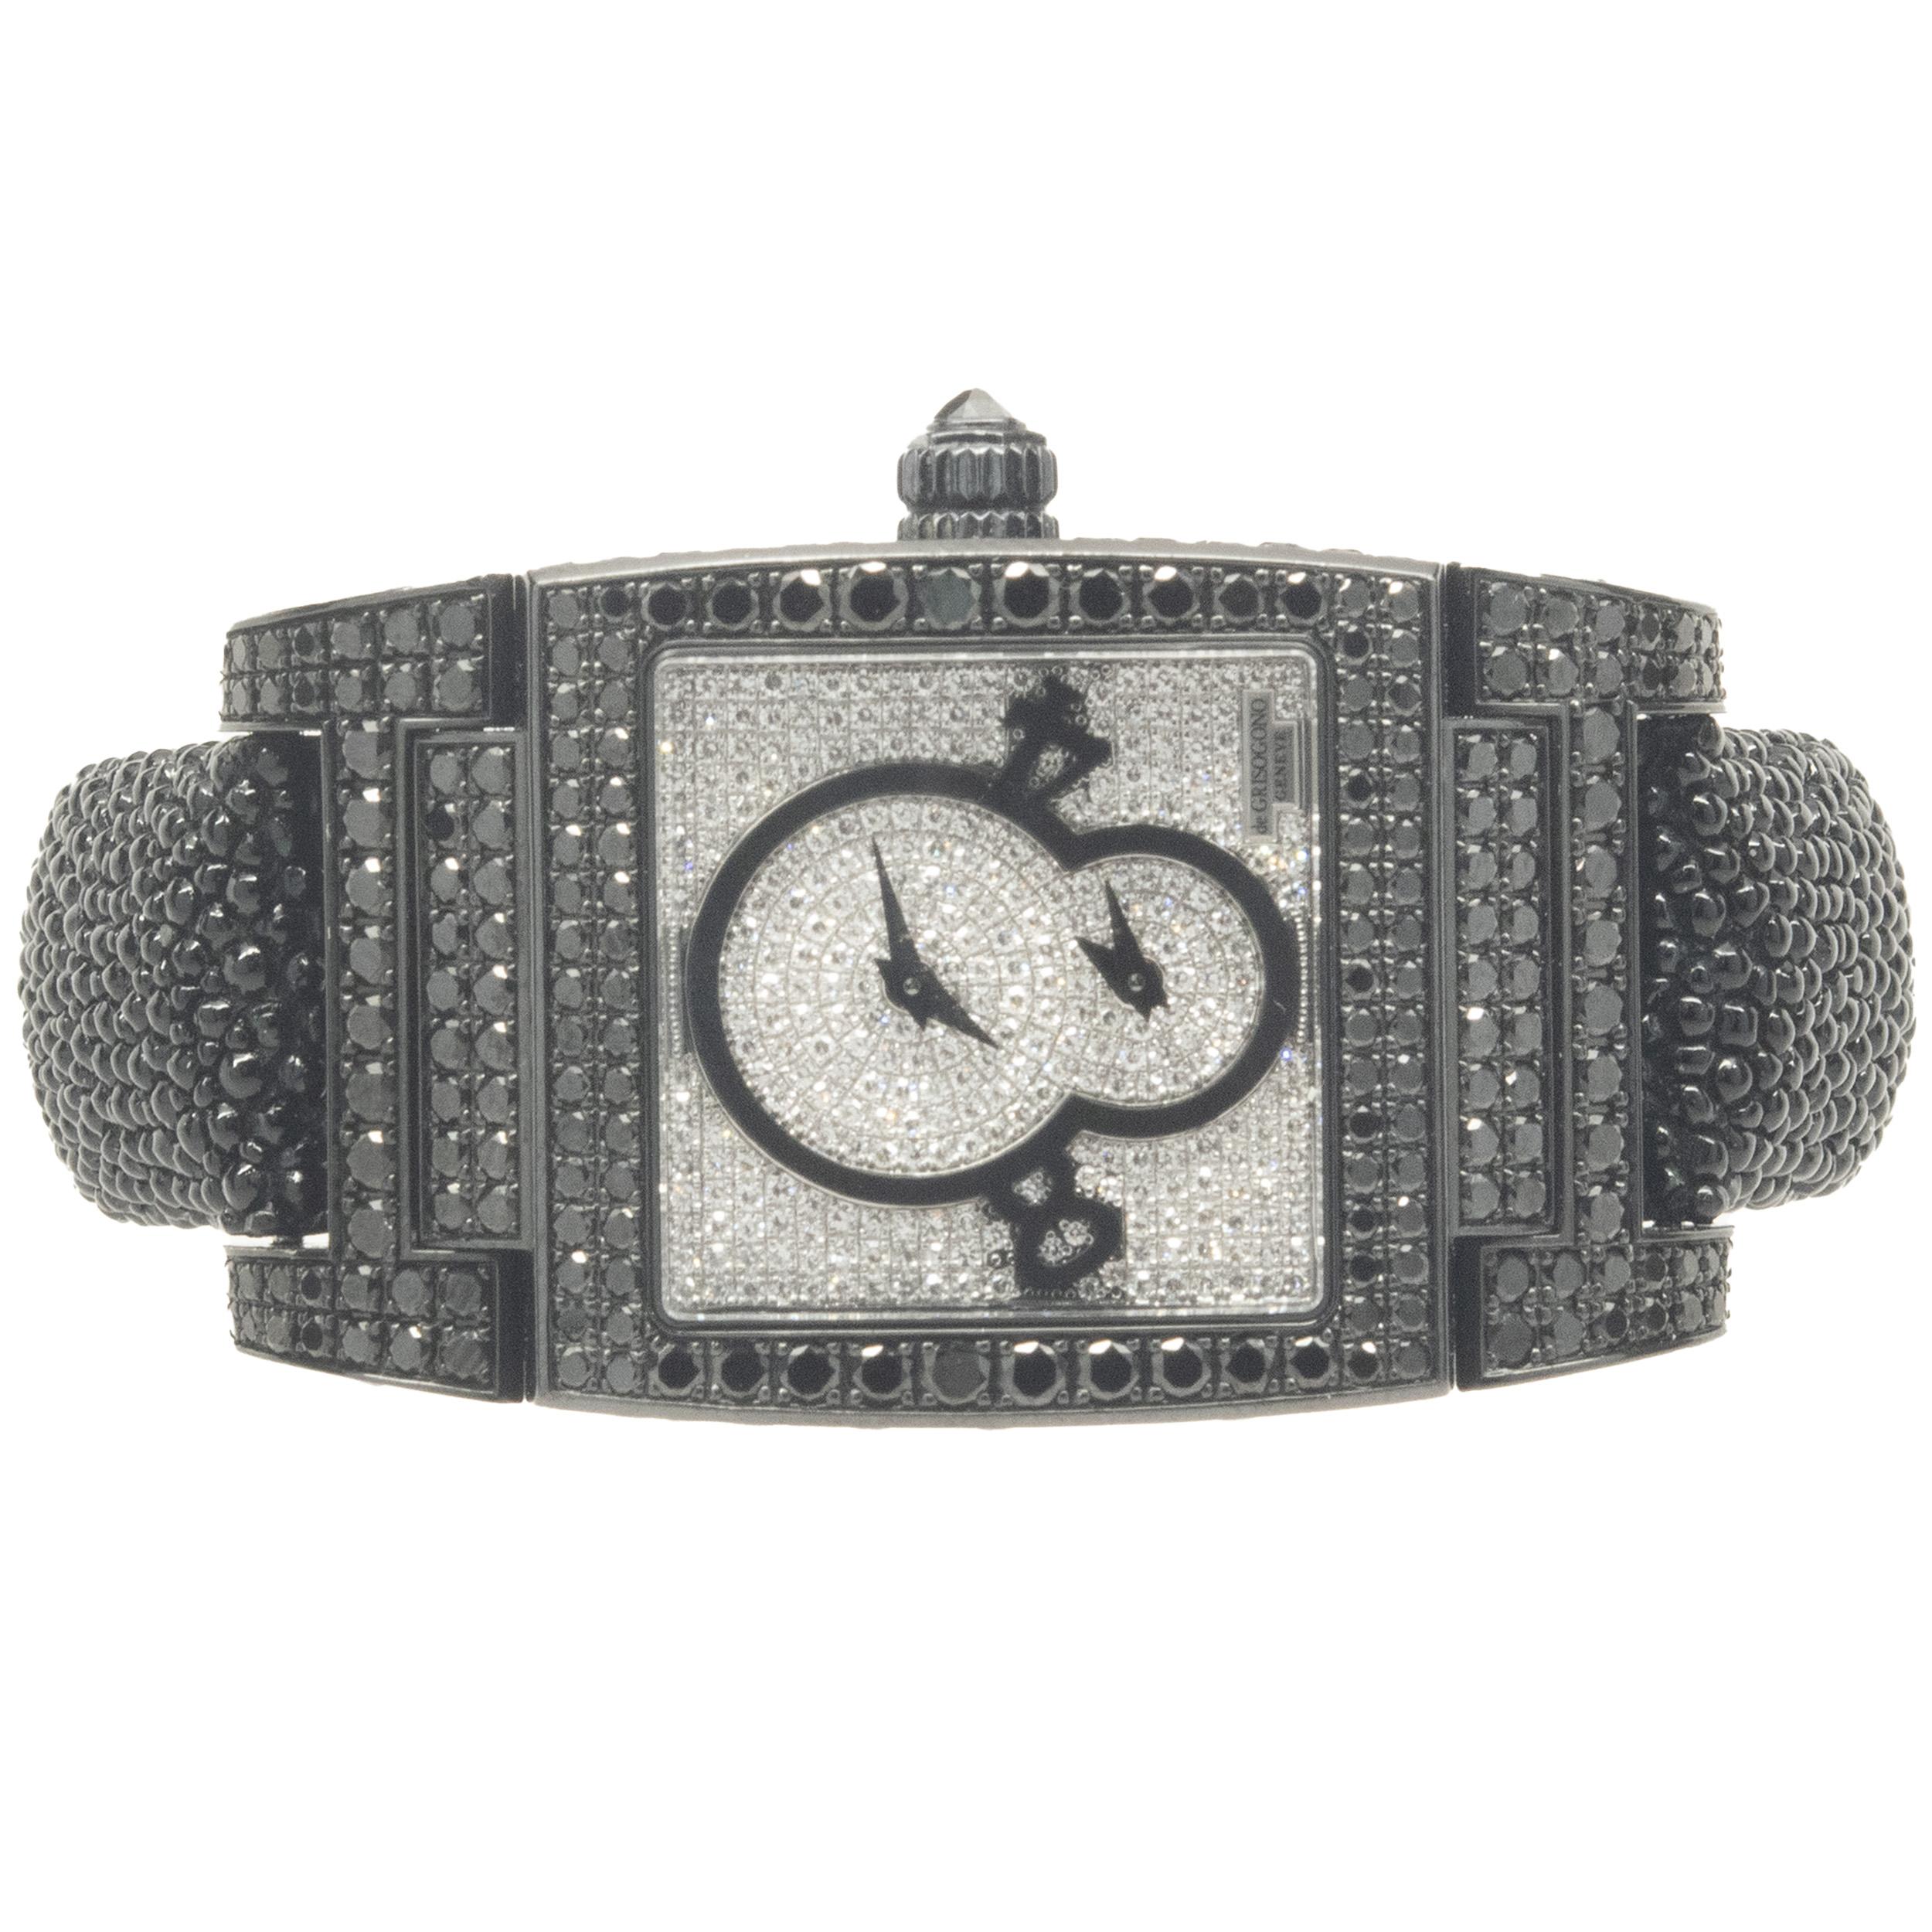 De Grisogono Black Stainless Steel Black and White Diamond UNO

Movement: automatic
Function: hours, minutes, seconds
Case: 43 x 29mm rectangular black stainless steel pave diamond case, sapphire crystal, push/pull crown
Dial: pave diamond
Bracelet: